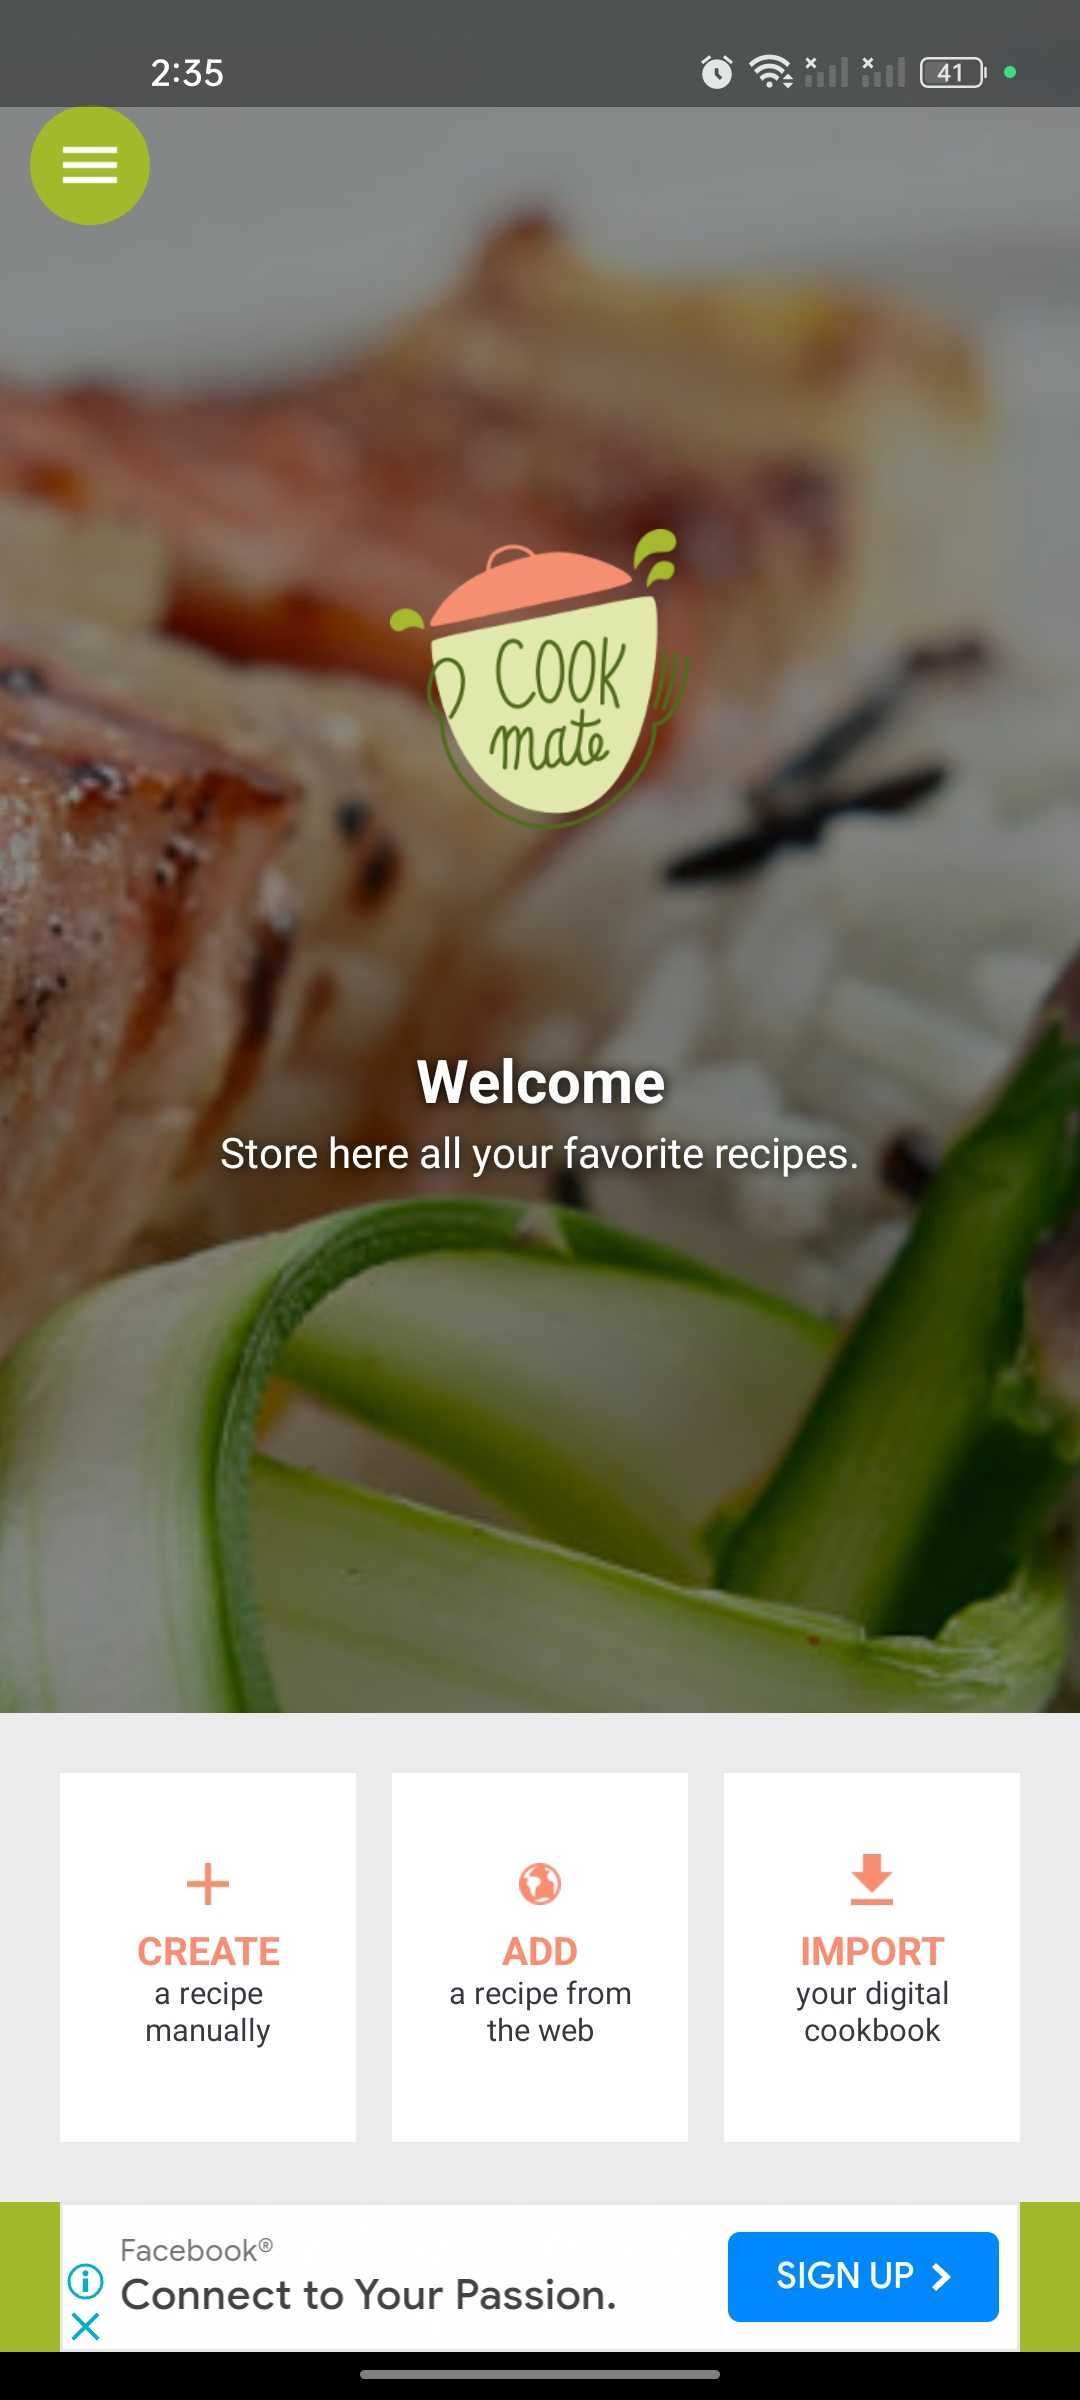 Cookmate app homepage in Android